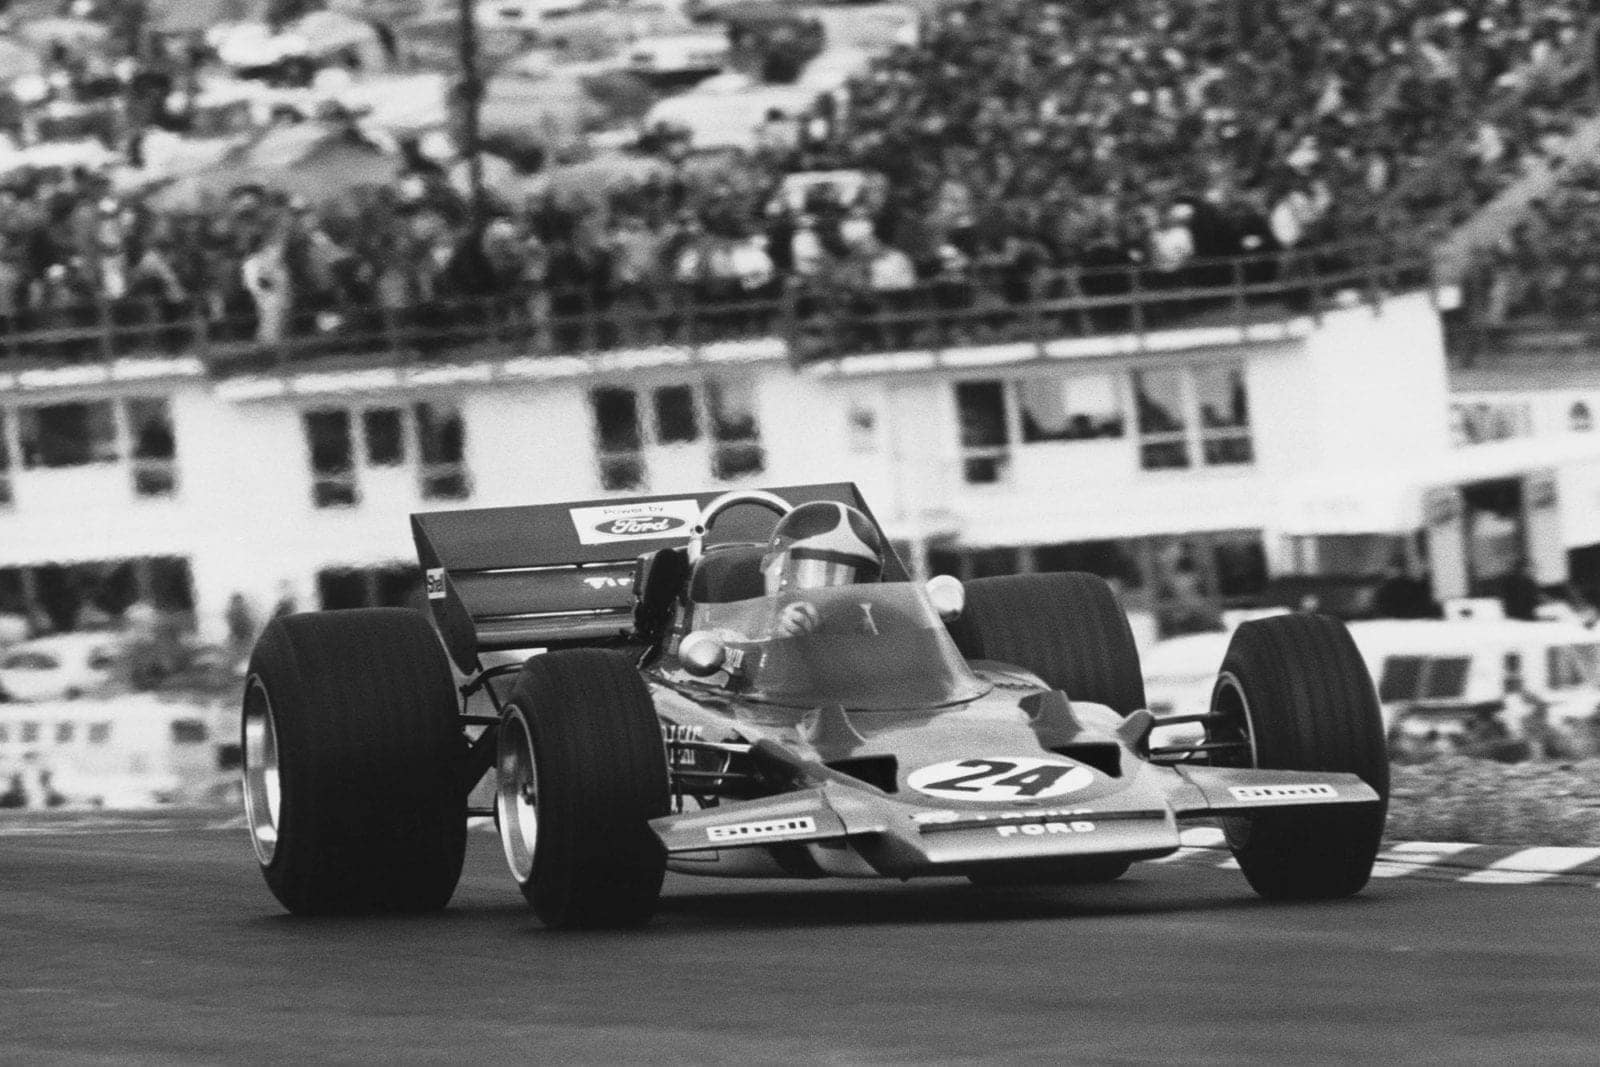 Emerson Fittipaldi driving for Lotus at the 1970 United States Grand Prix